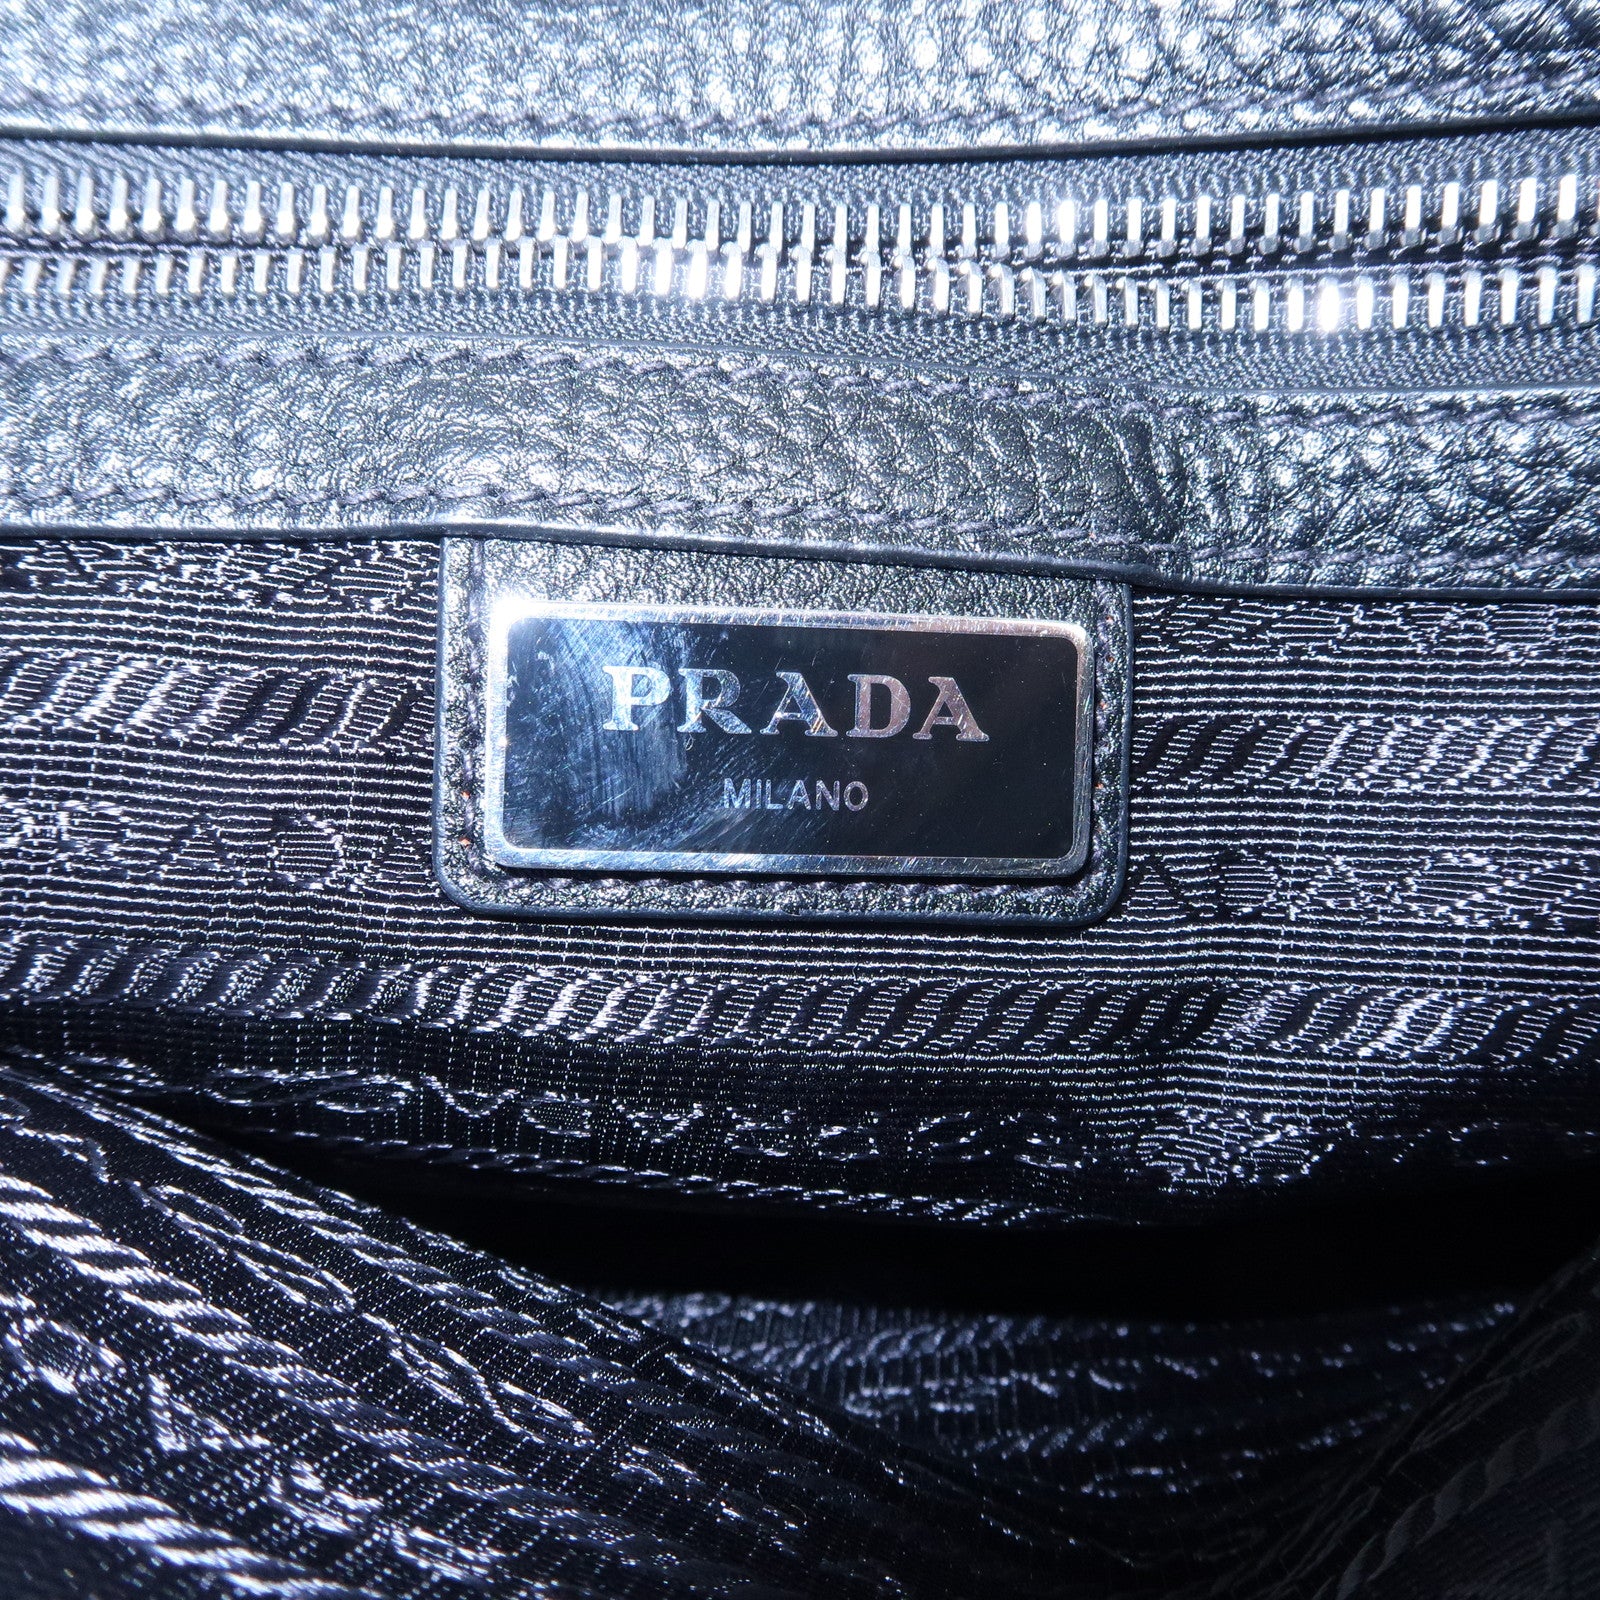 Prada Collection - Shop Authentic Handbags & Shoes in India